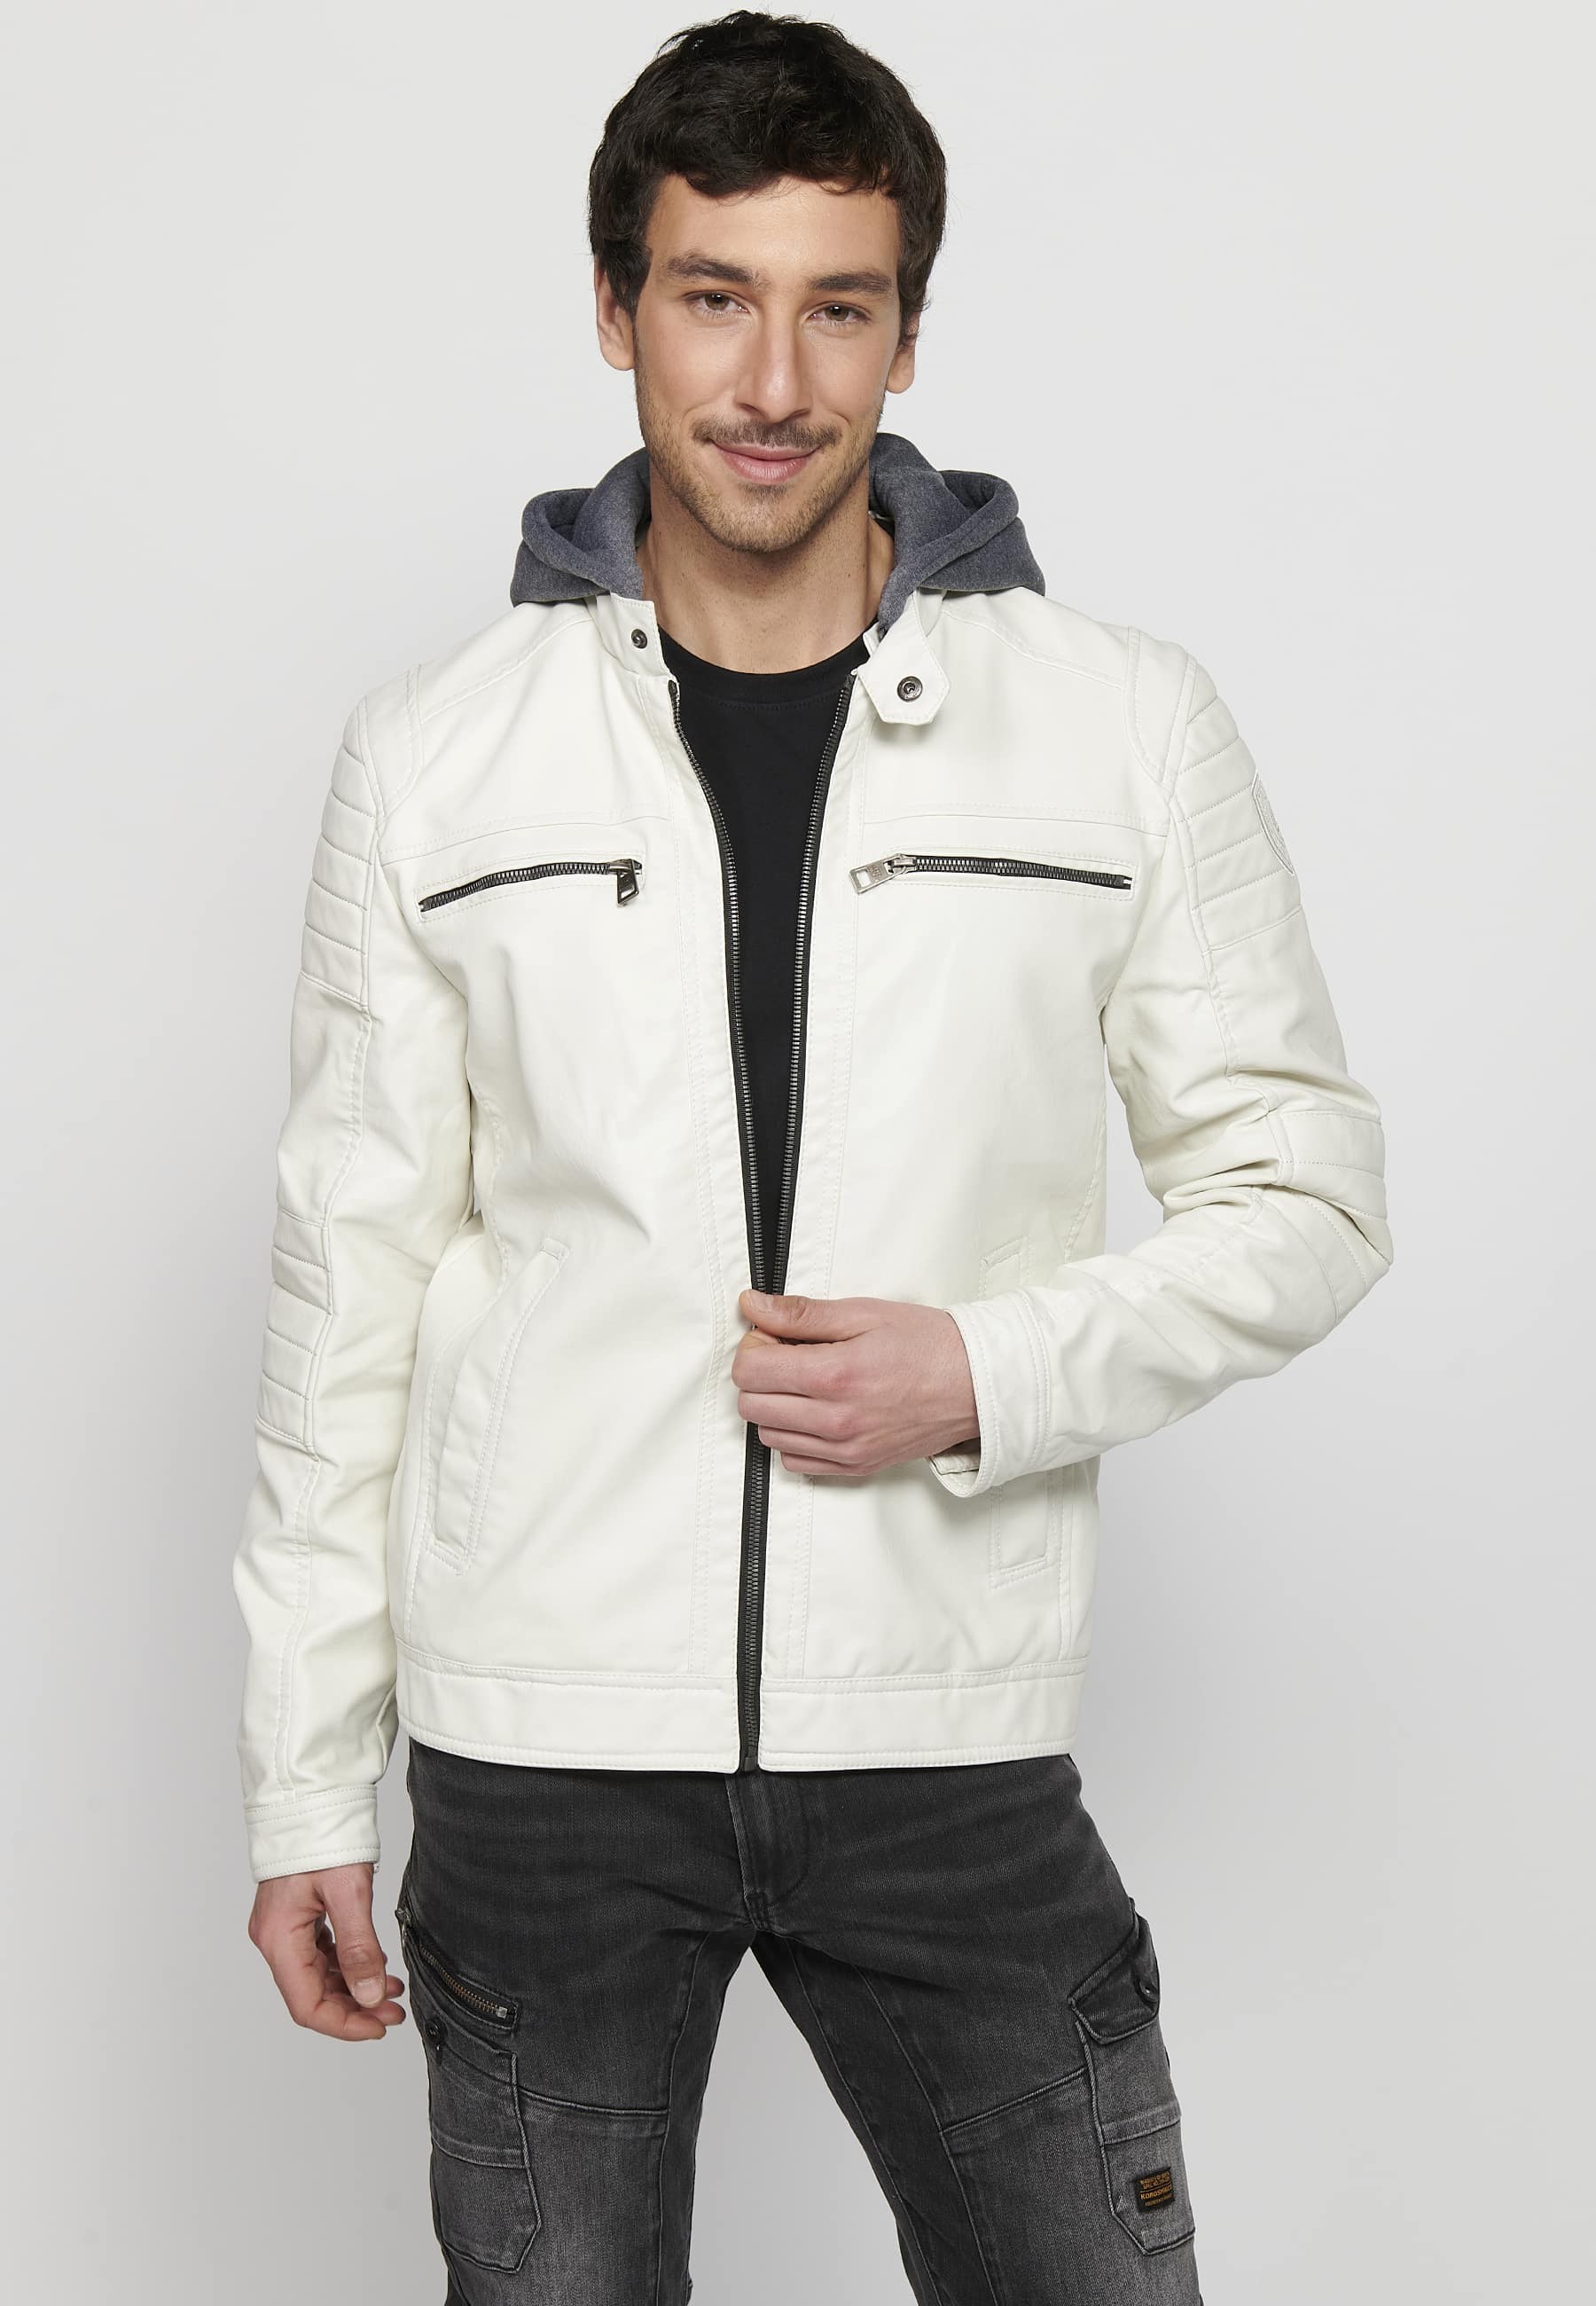 Long-sleeved jacket with zipper front closure and adjustable detachable hooded collar with drawstring in Ecru for Men